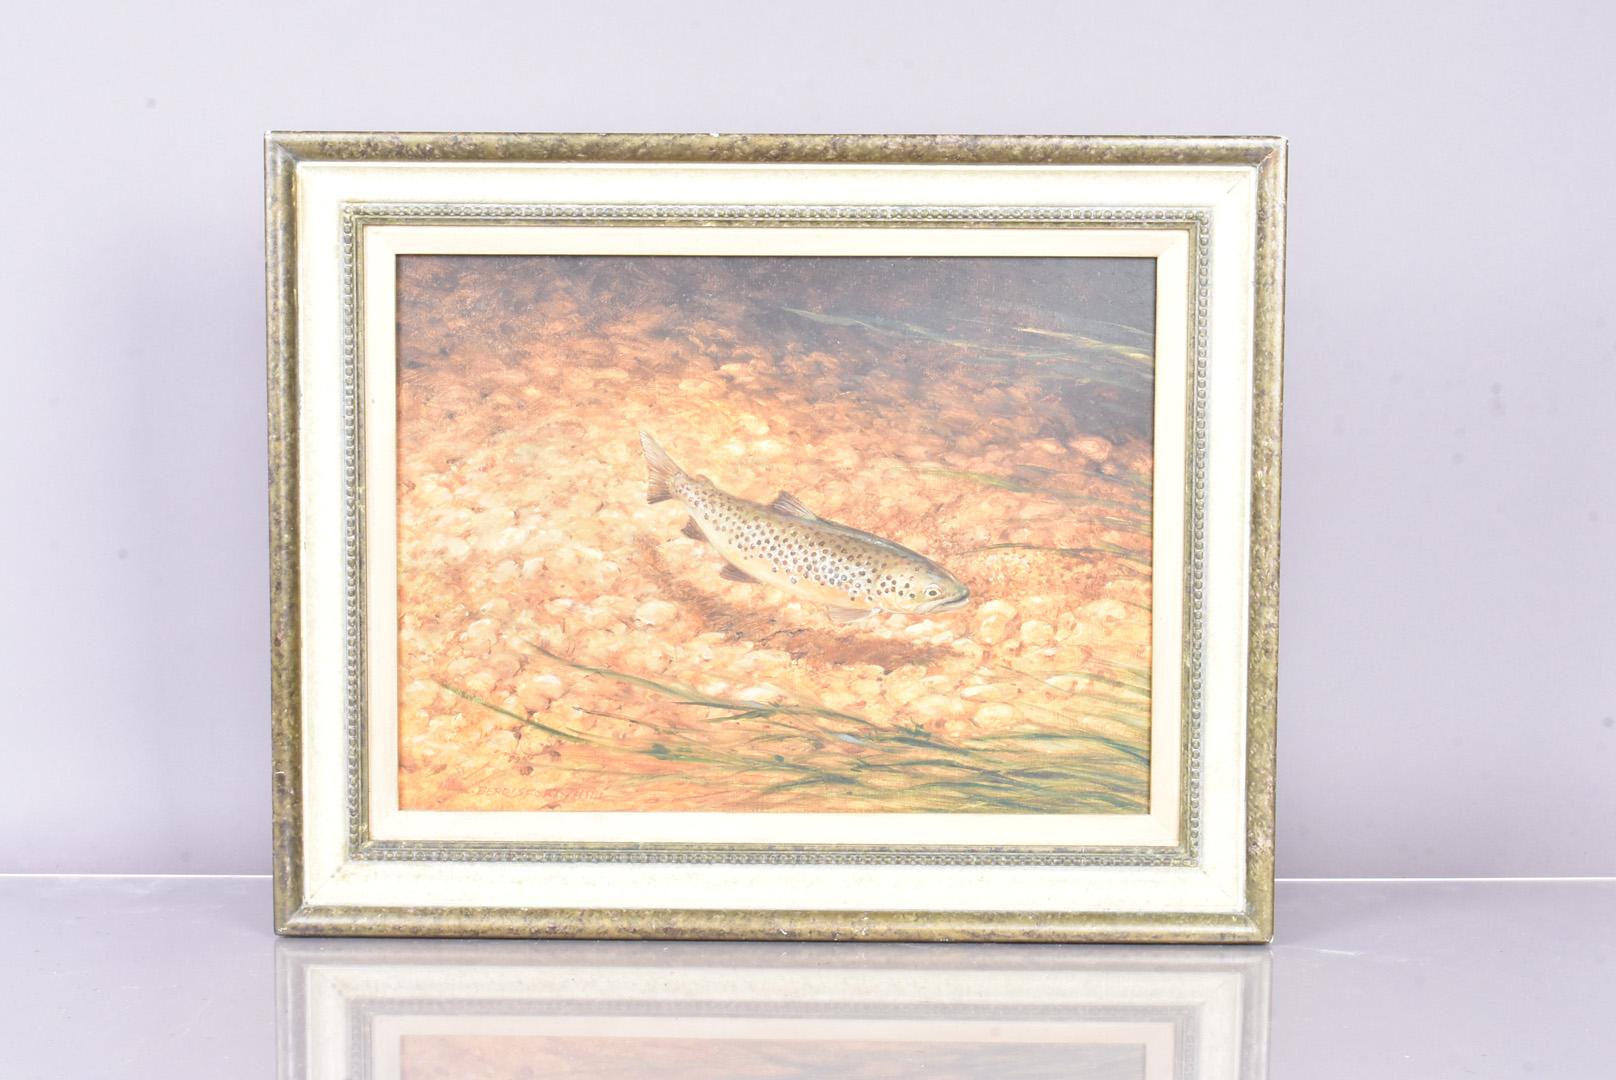 Berrisford Hill, (British, 1930-), oil on board, depicting a brown trout, signed in red to the lower